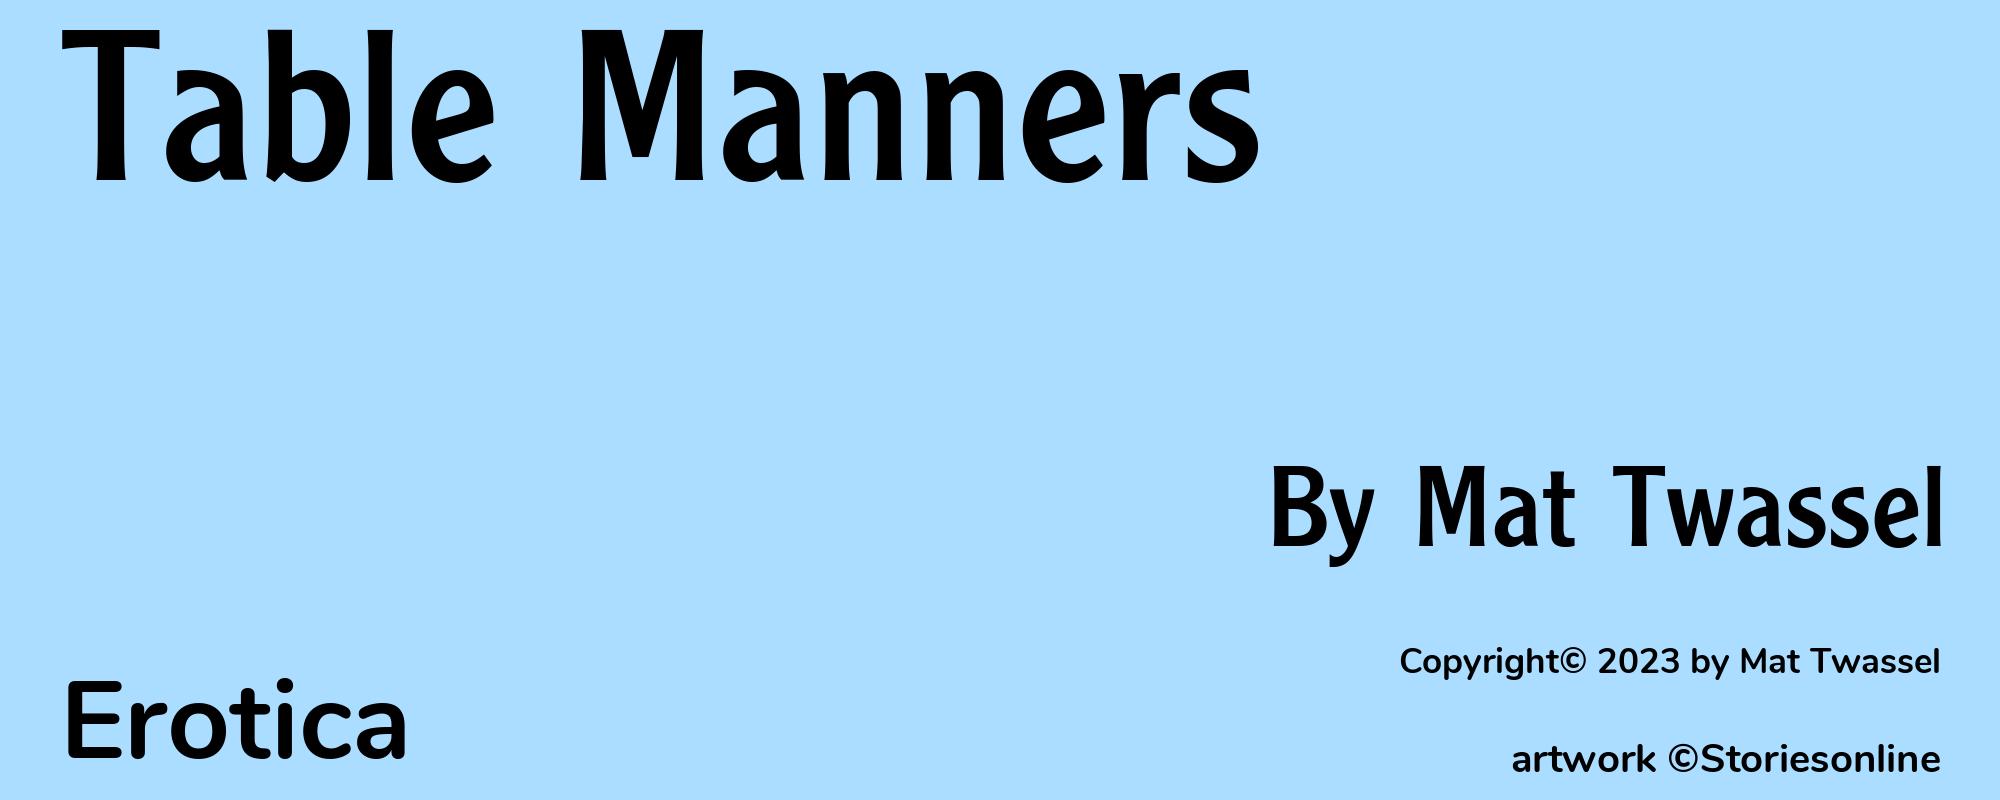 Table Manners - Cover